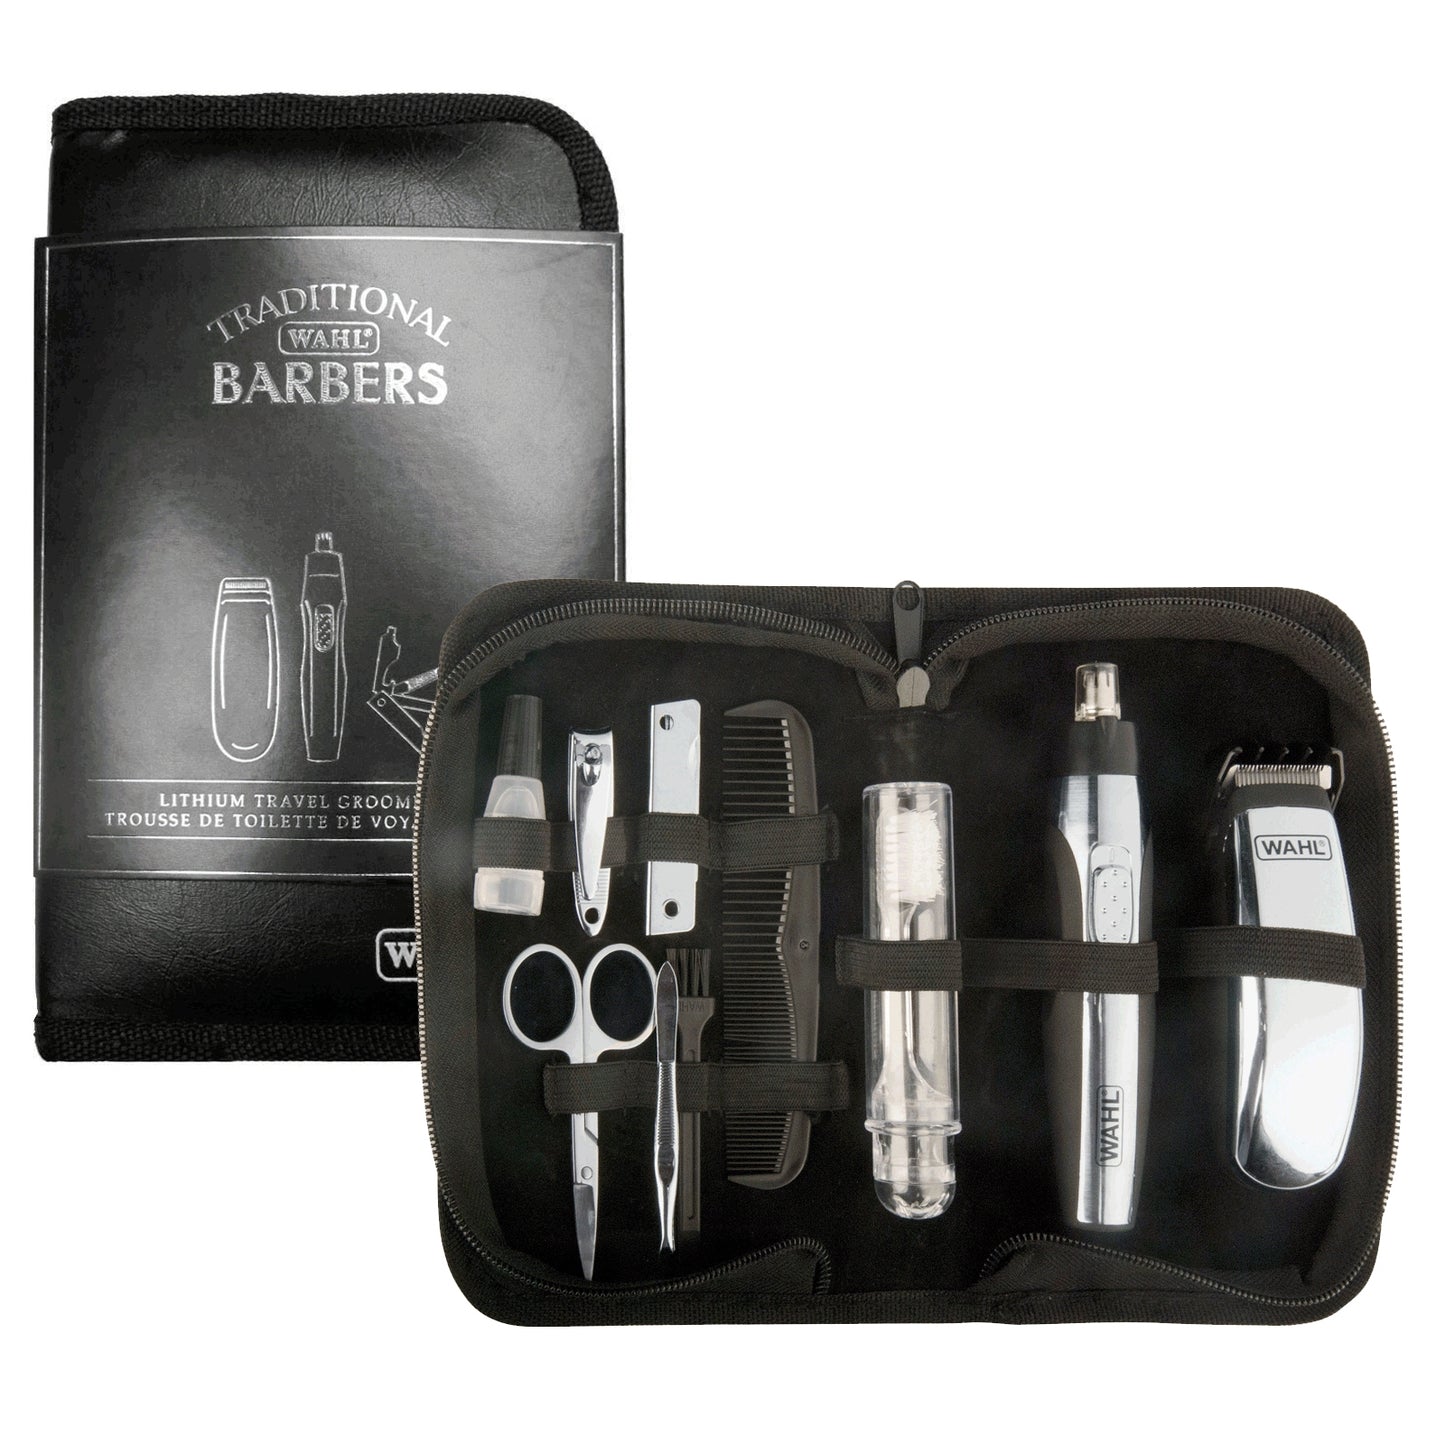 Trousse Wahl de voyage lithium Traditional Barbers